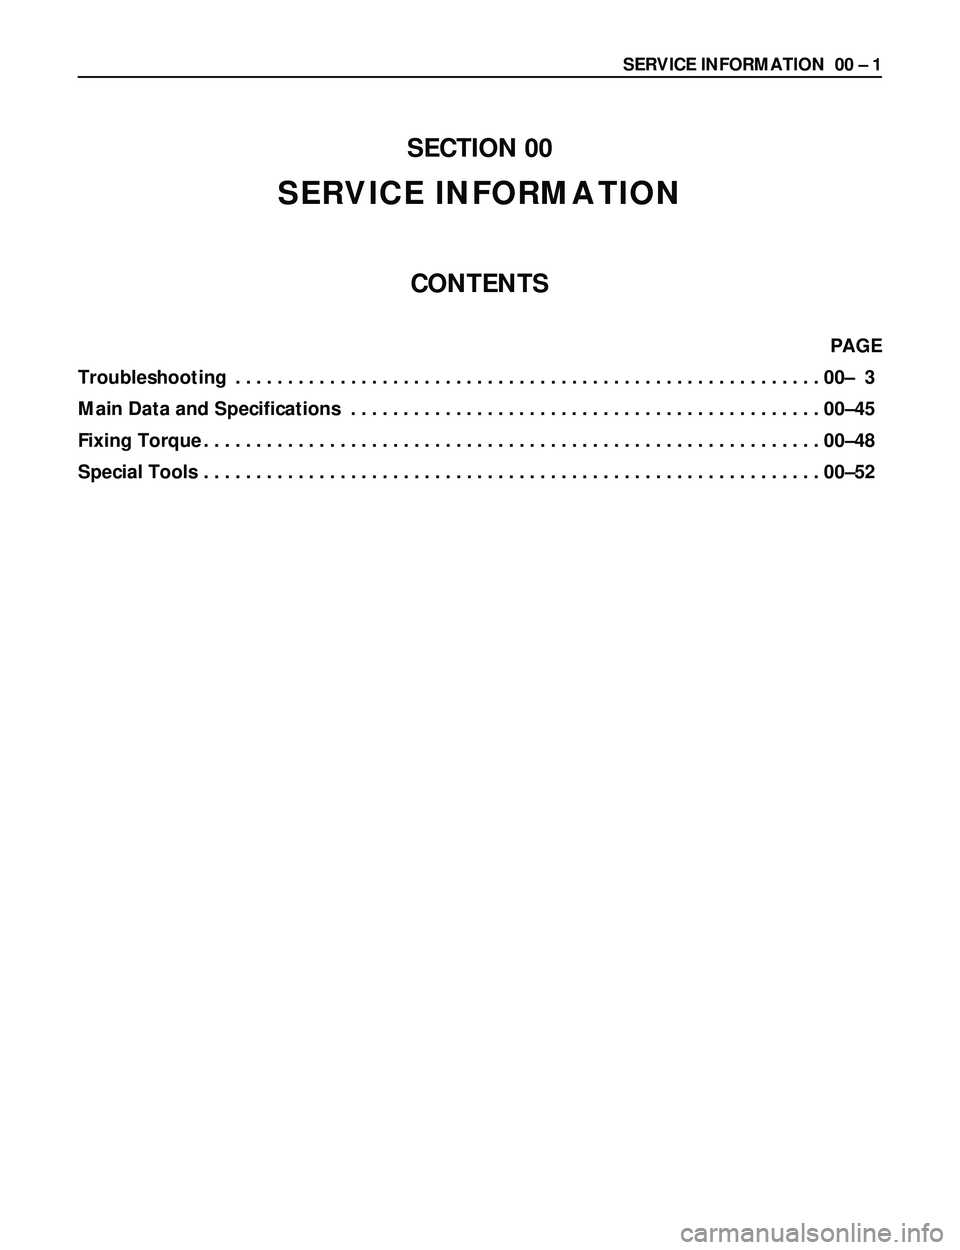 ISUZU TROOPER 1998  Service Owners Guide SECTION 00
SERVICE INFORMATION
CONTENTS
PAGE 
Troubleshooting........................................................00Ð 3
Main Data and Specifications.............................................00�